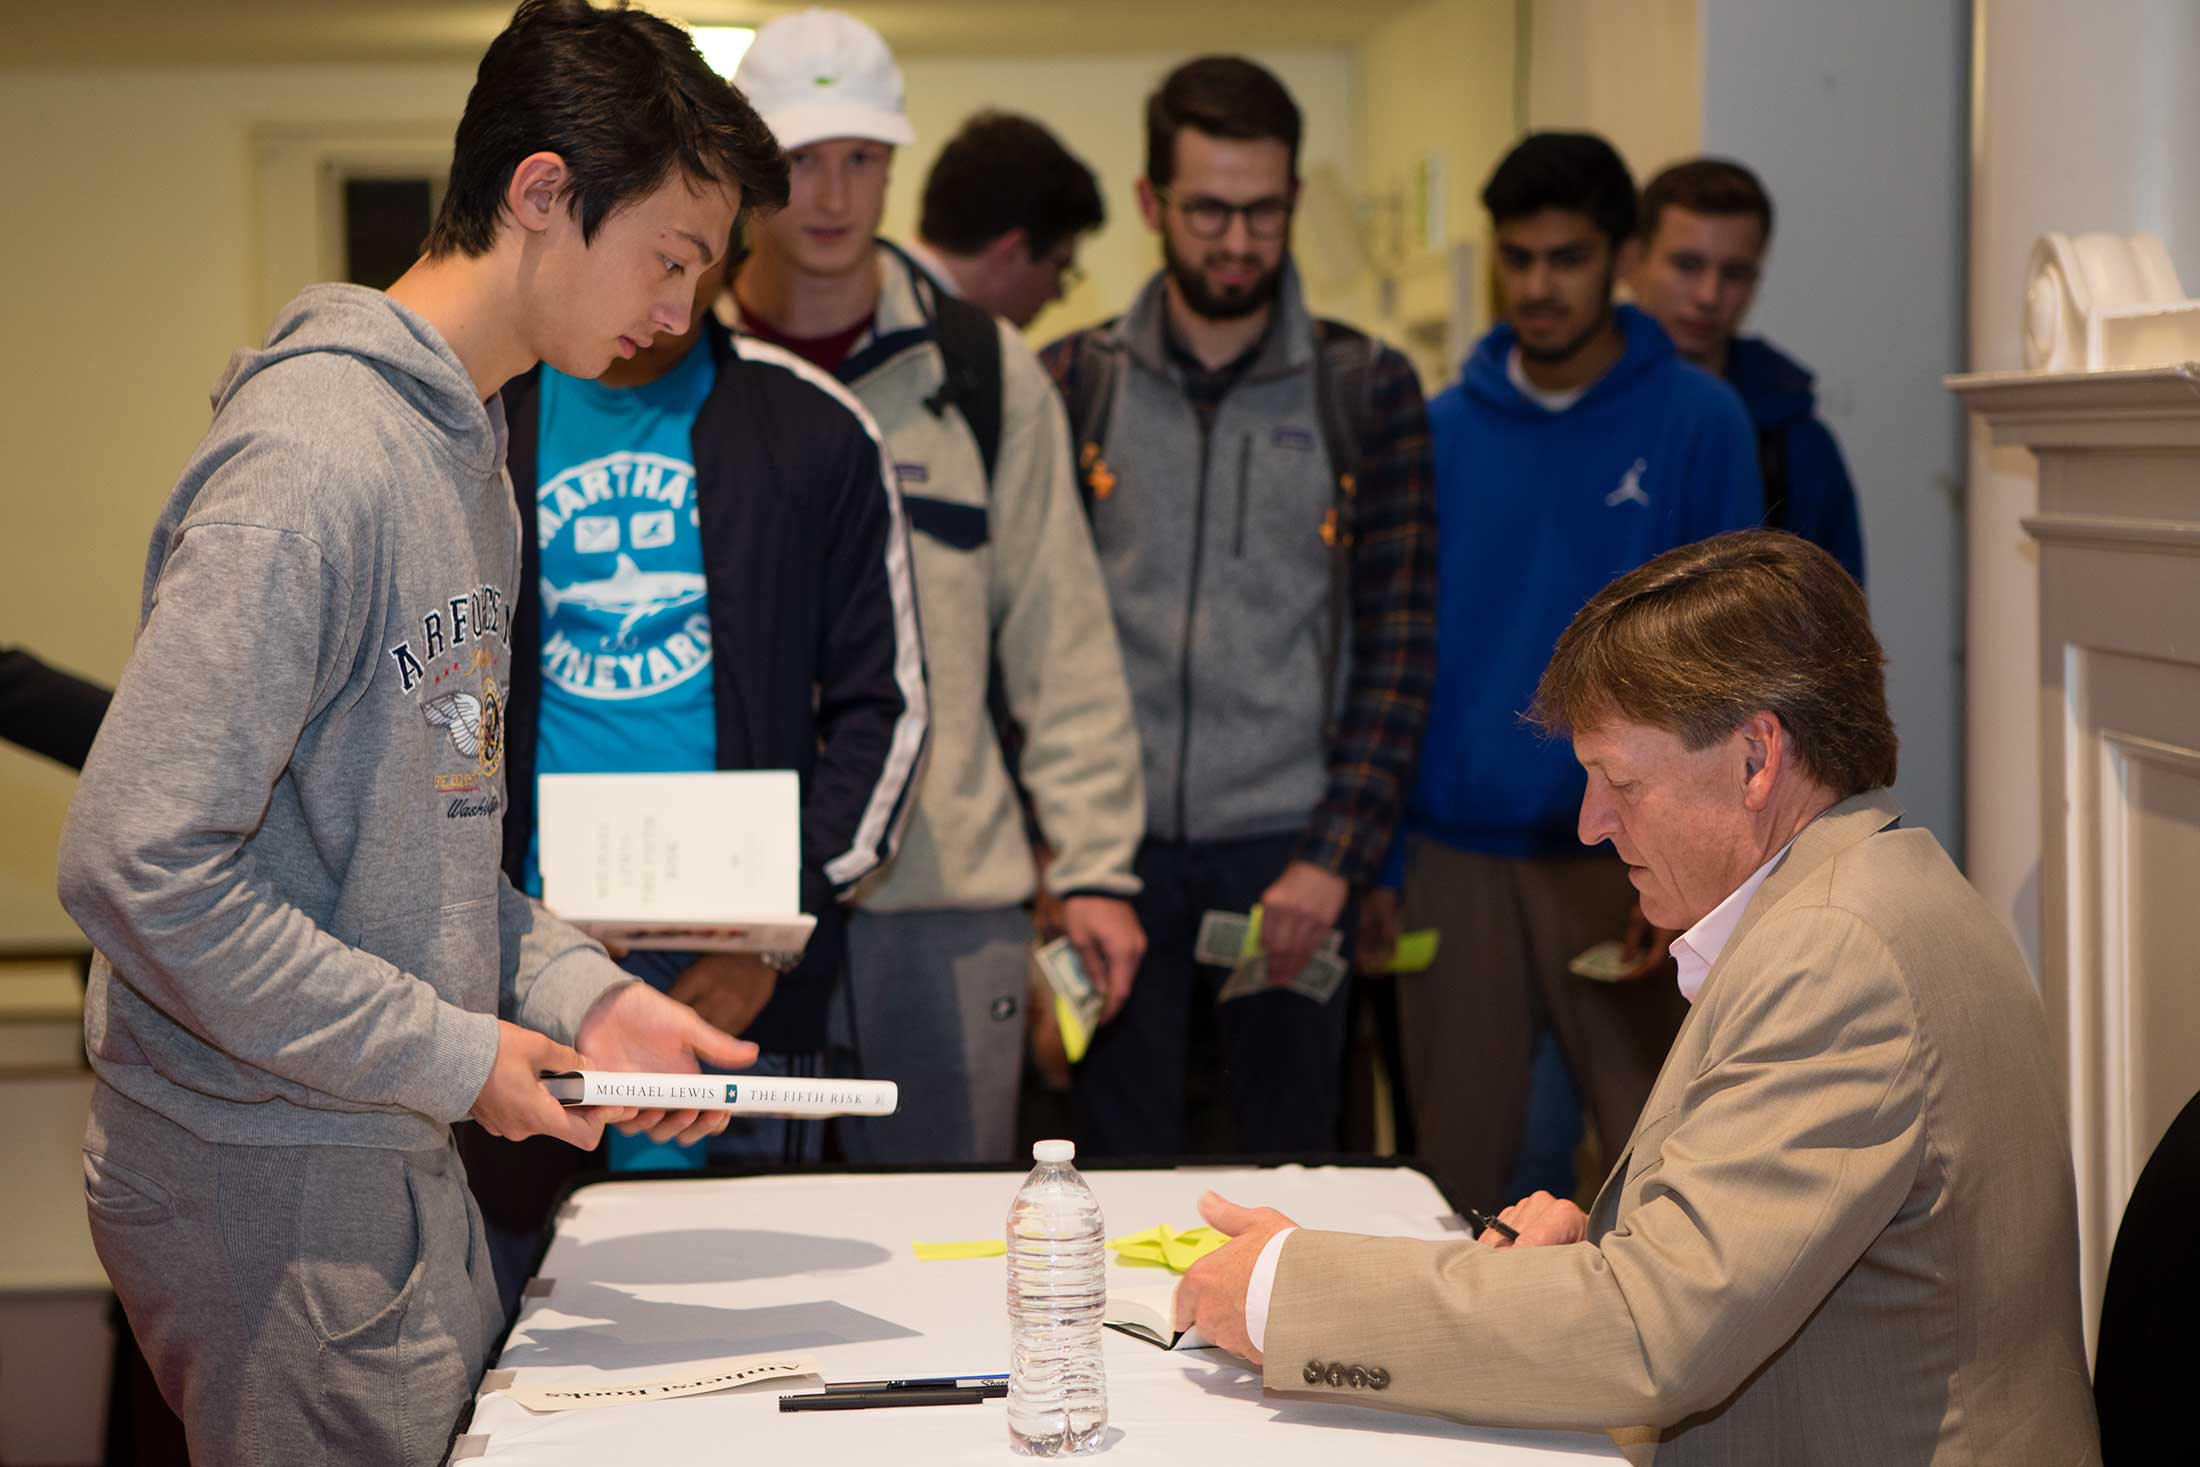 Student wait in line to get copies of Michael Lewis' book signed by the author.